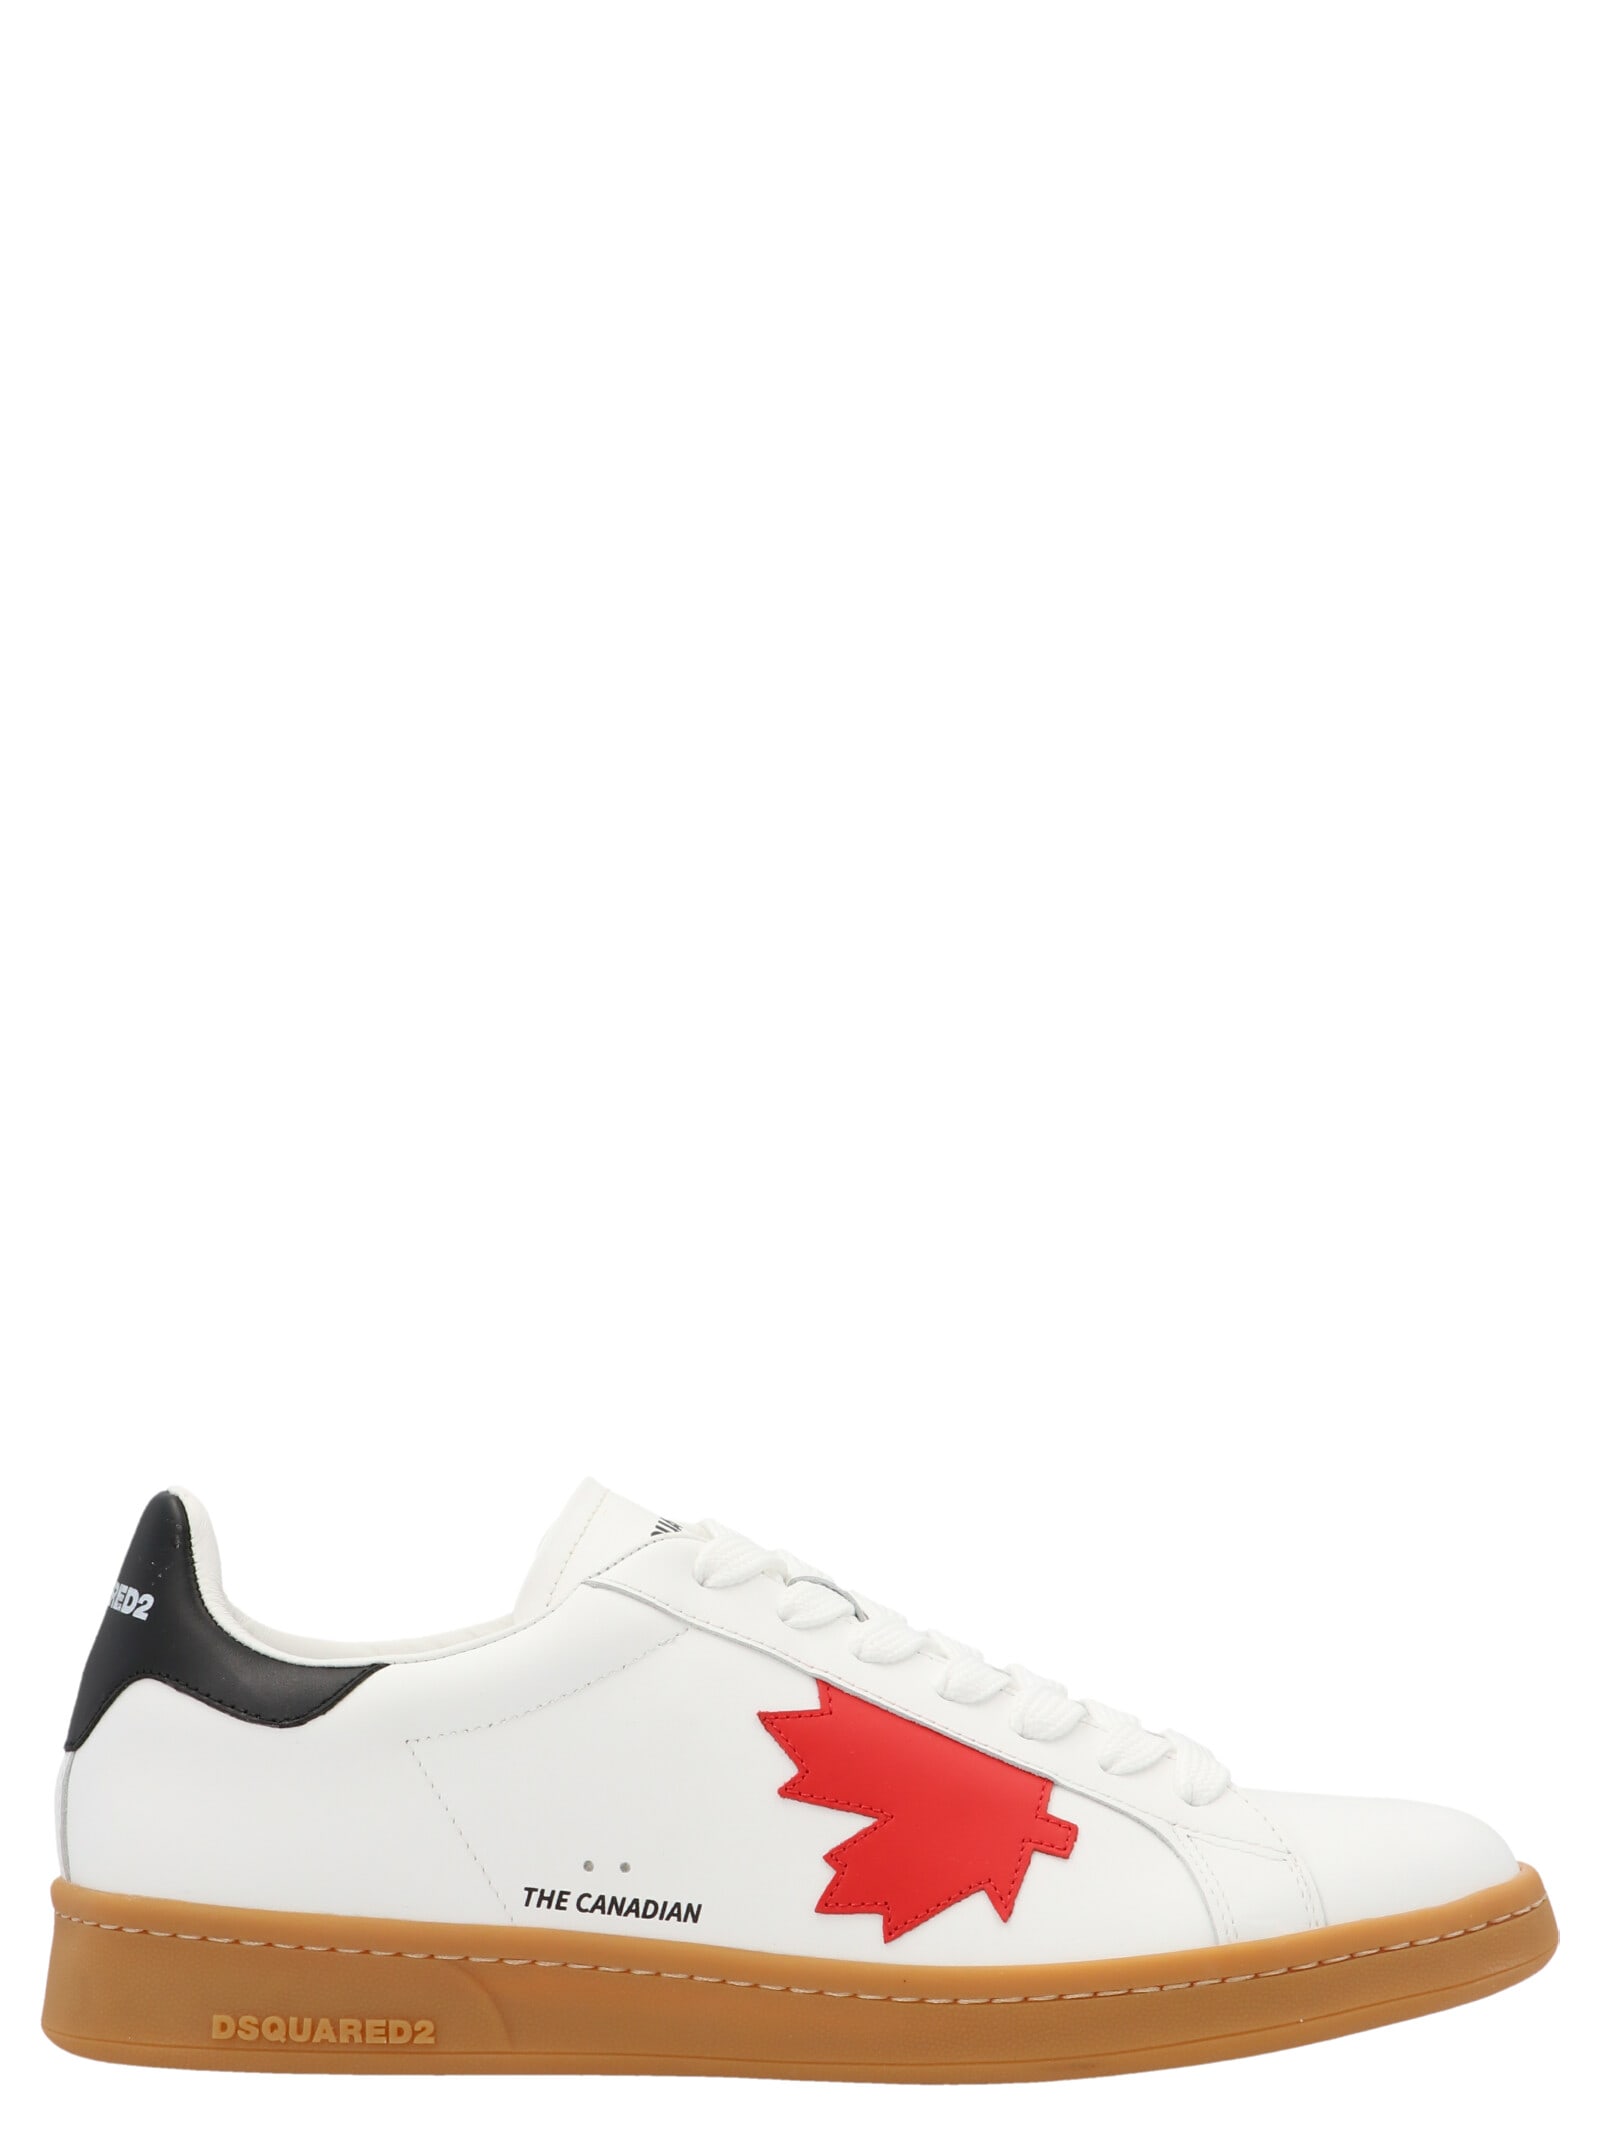 Dsquared2 Contrast Leaf Sneakers